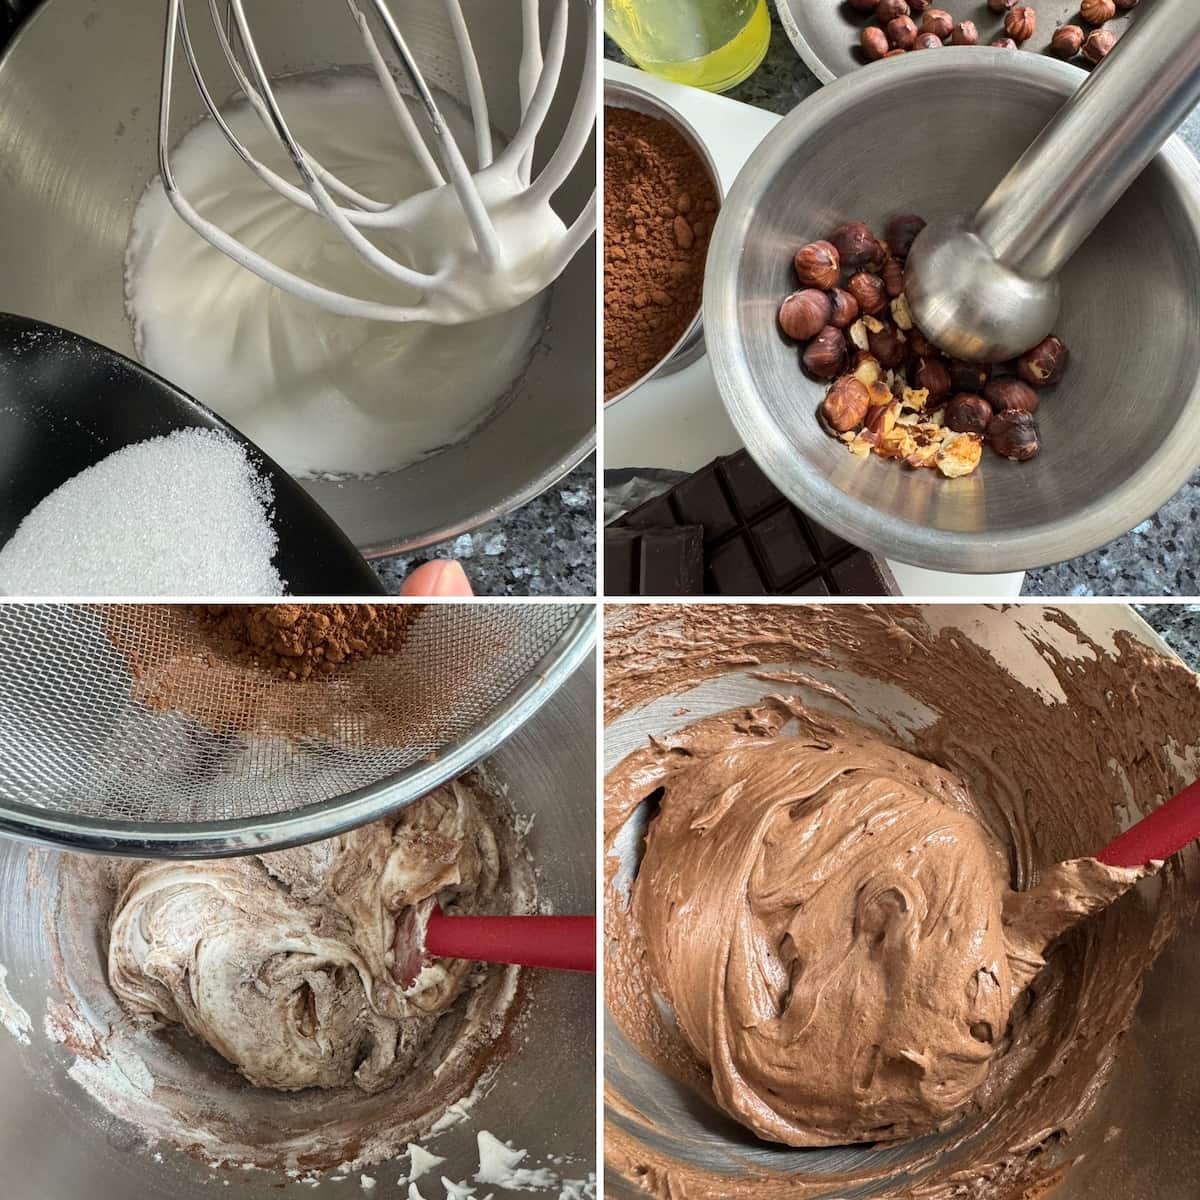 how chocolate cake is made, step by step of whisking egg whites and incorporating chocolate powder, flour and optional toasted hazelnuts